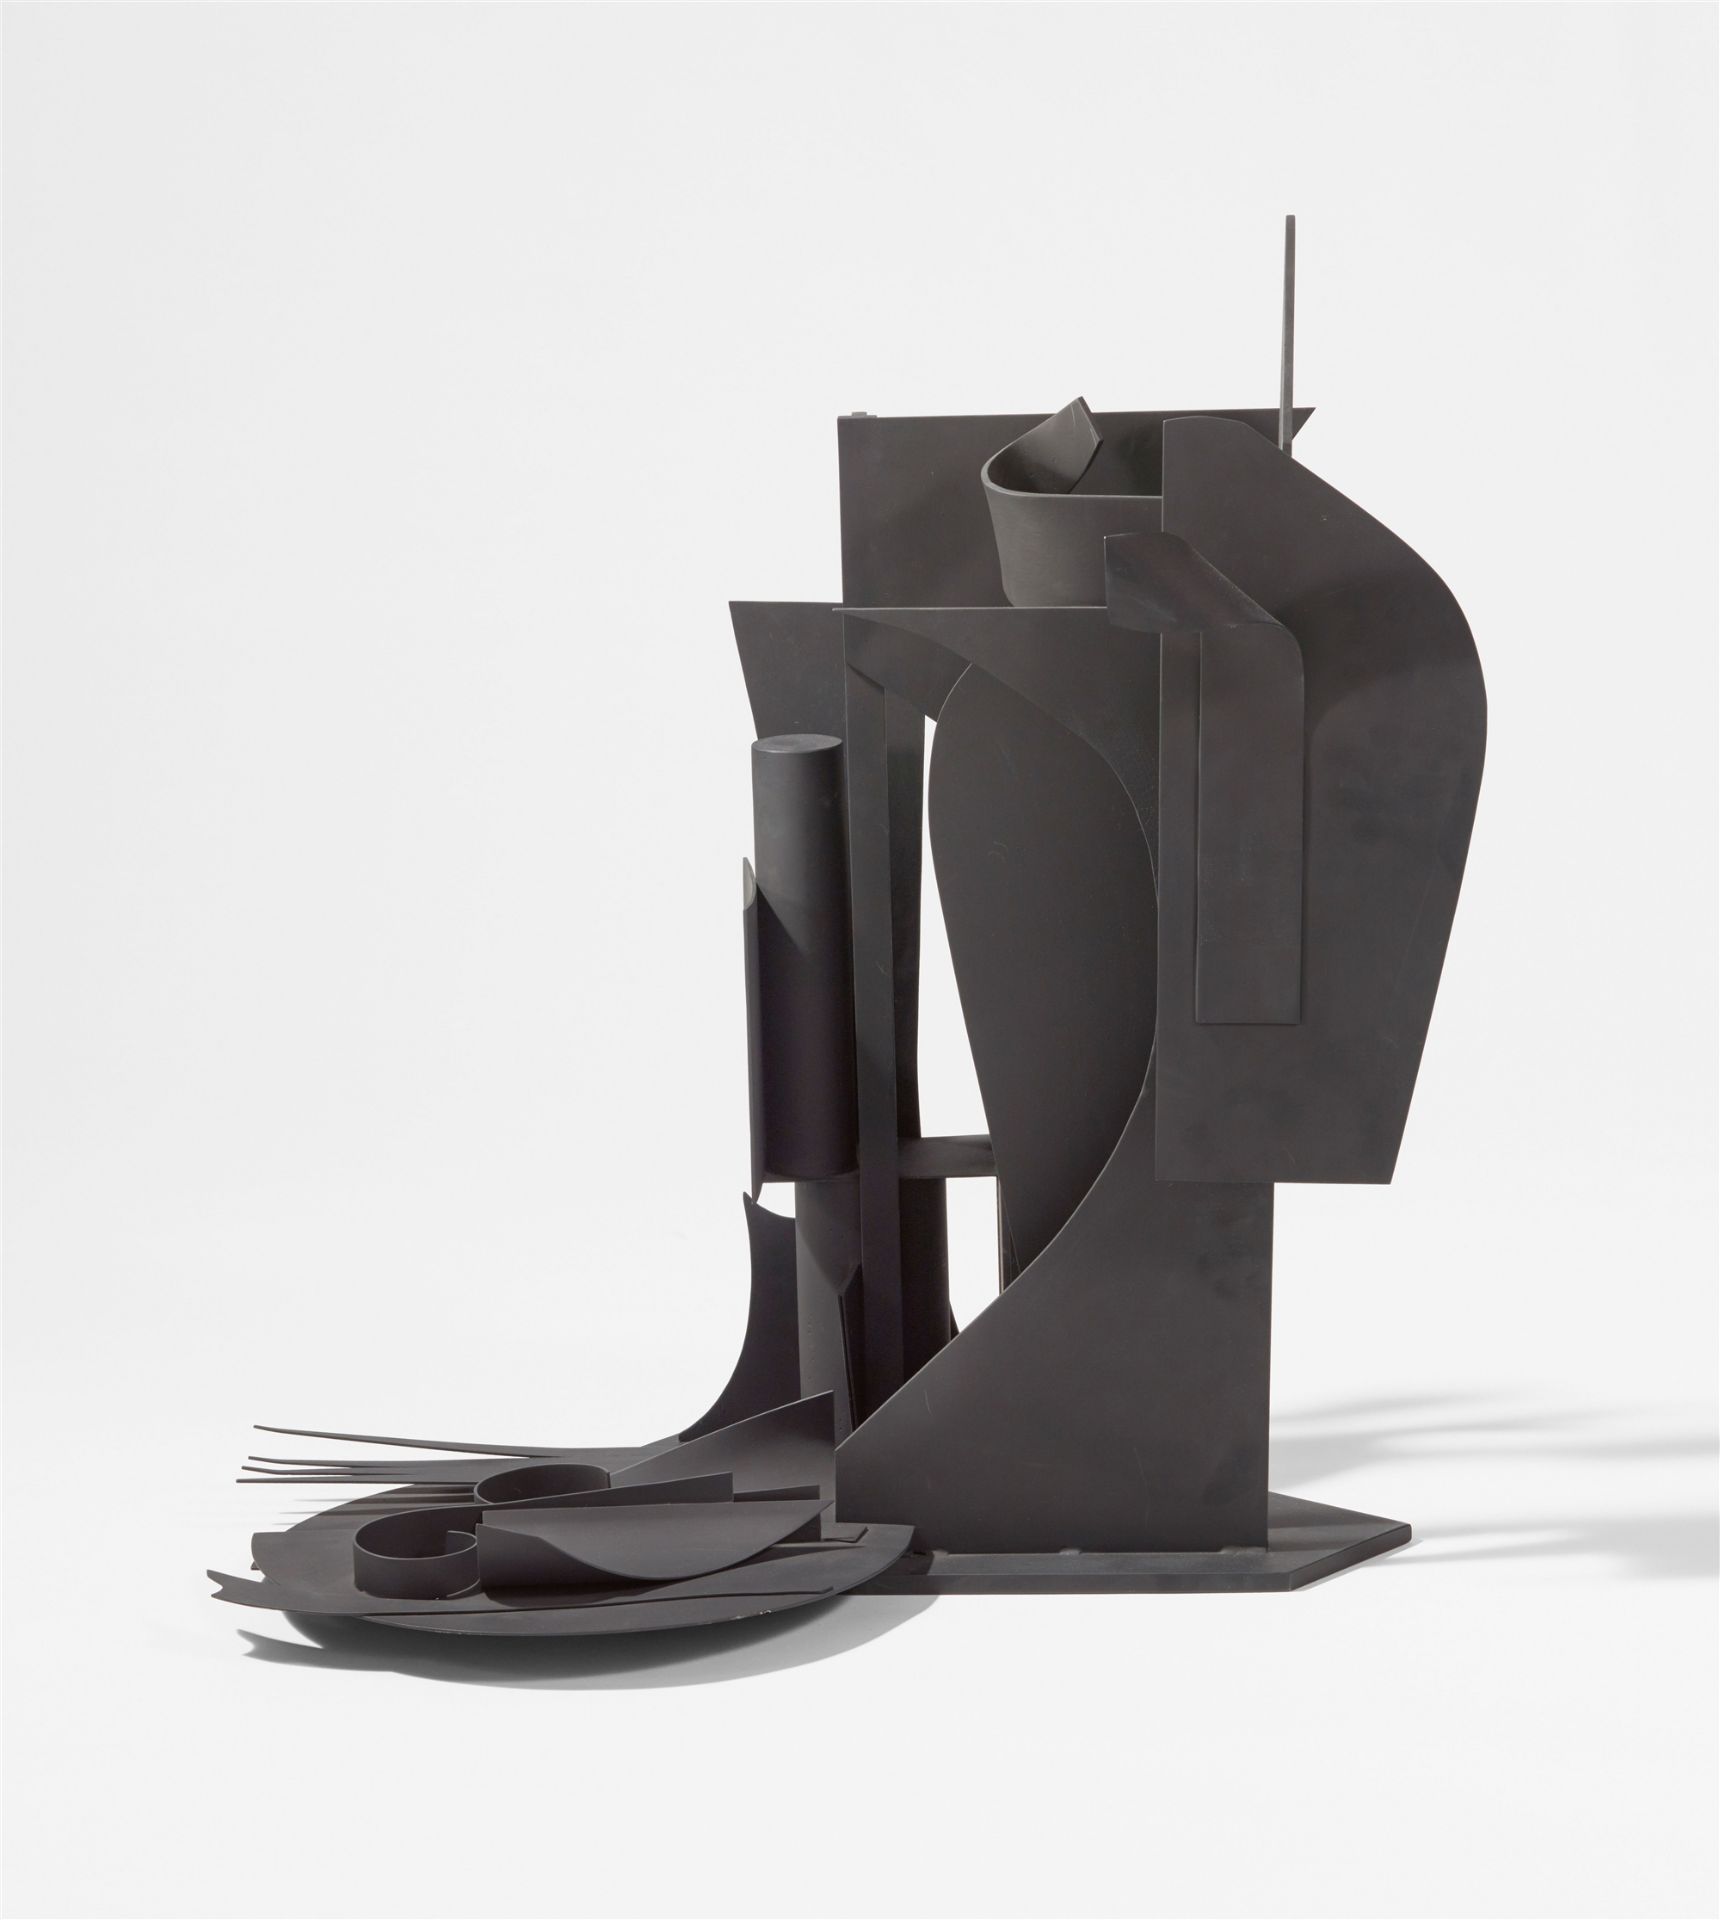 Louise Nevelson, Maquette for Sun Disc/Moon Shadow V